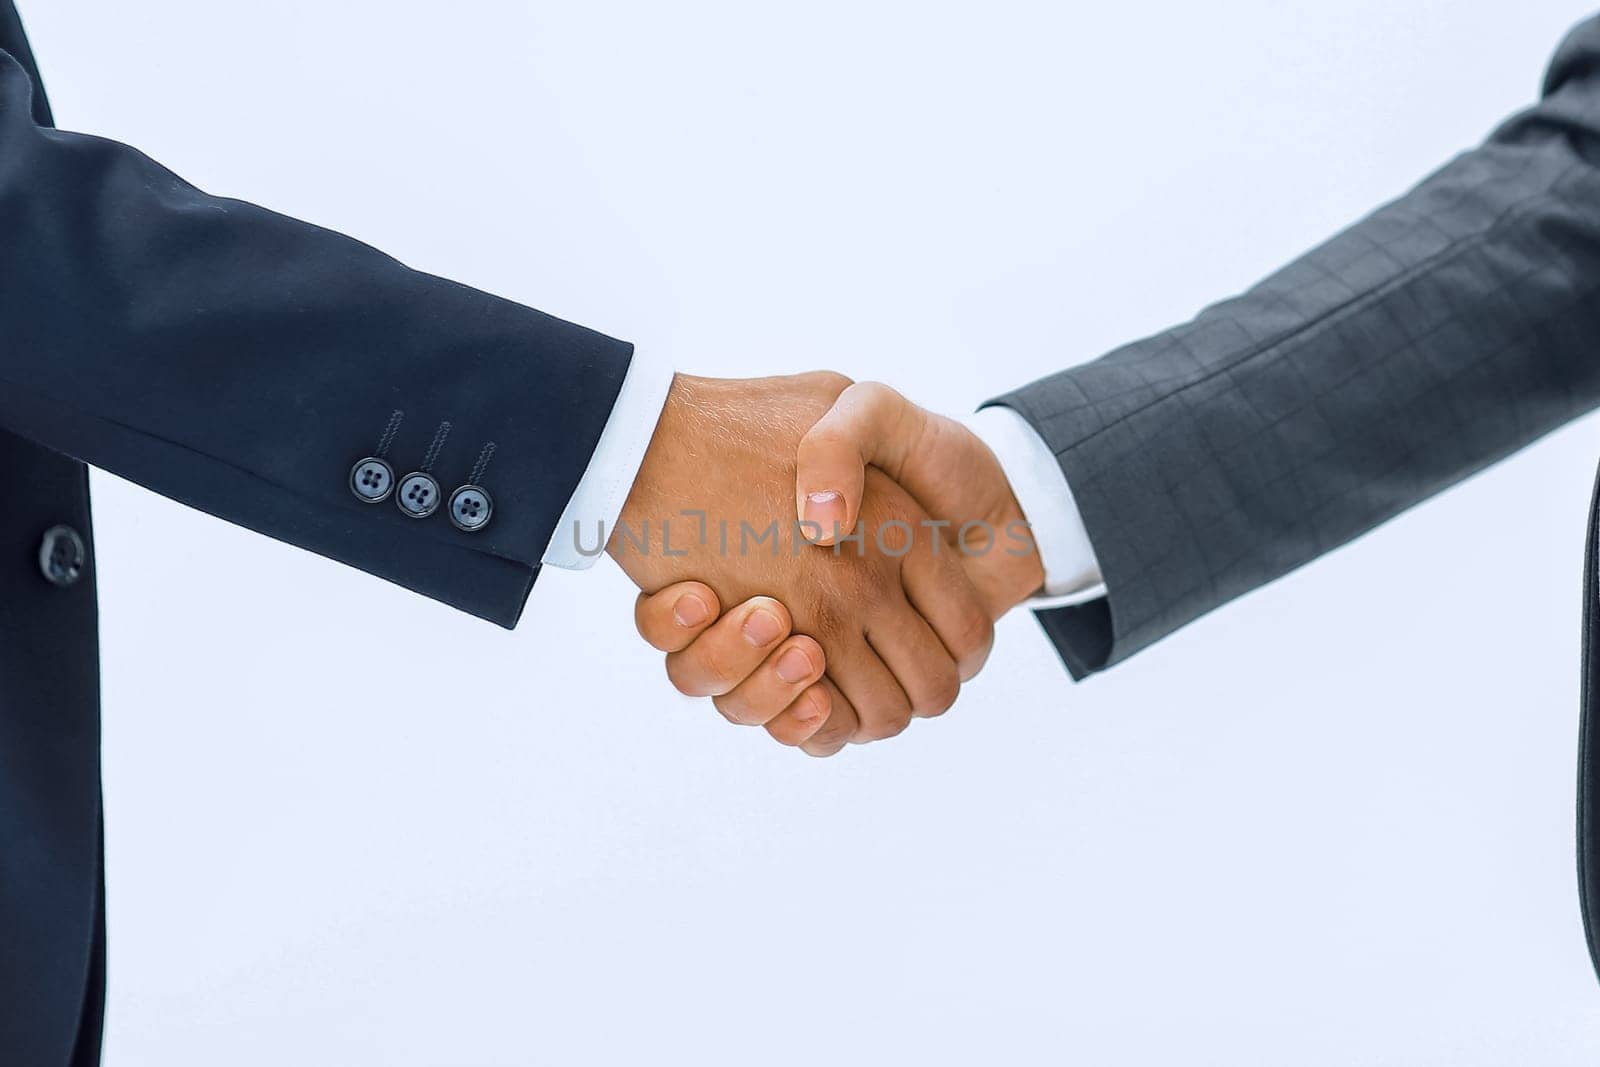 Investor and contractor shaking hands